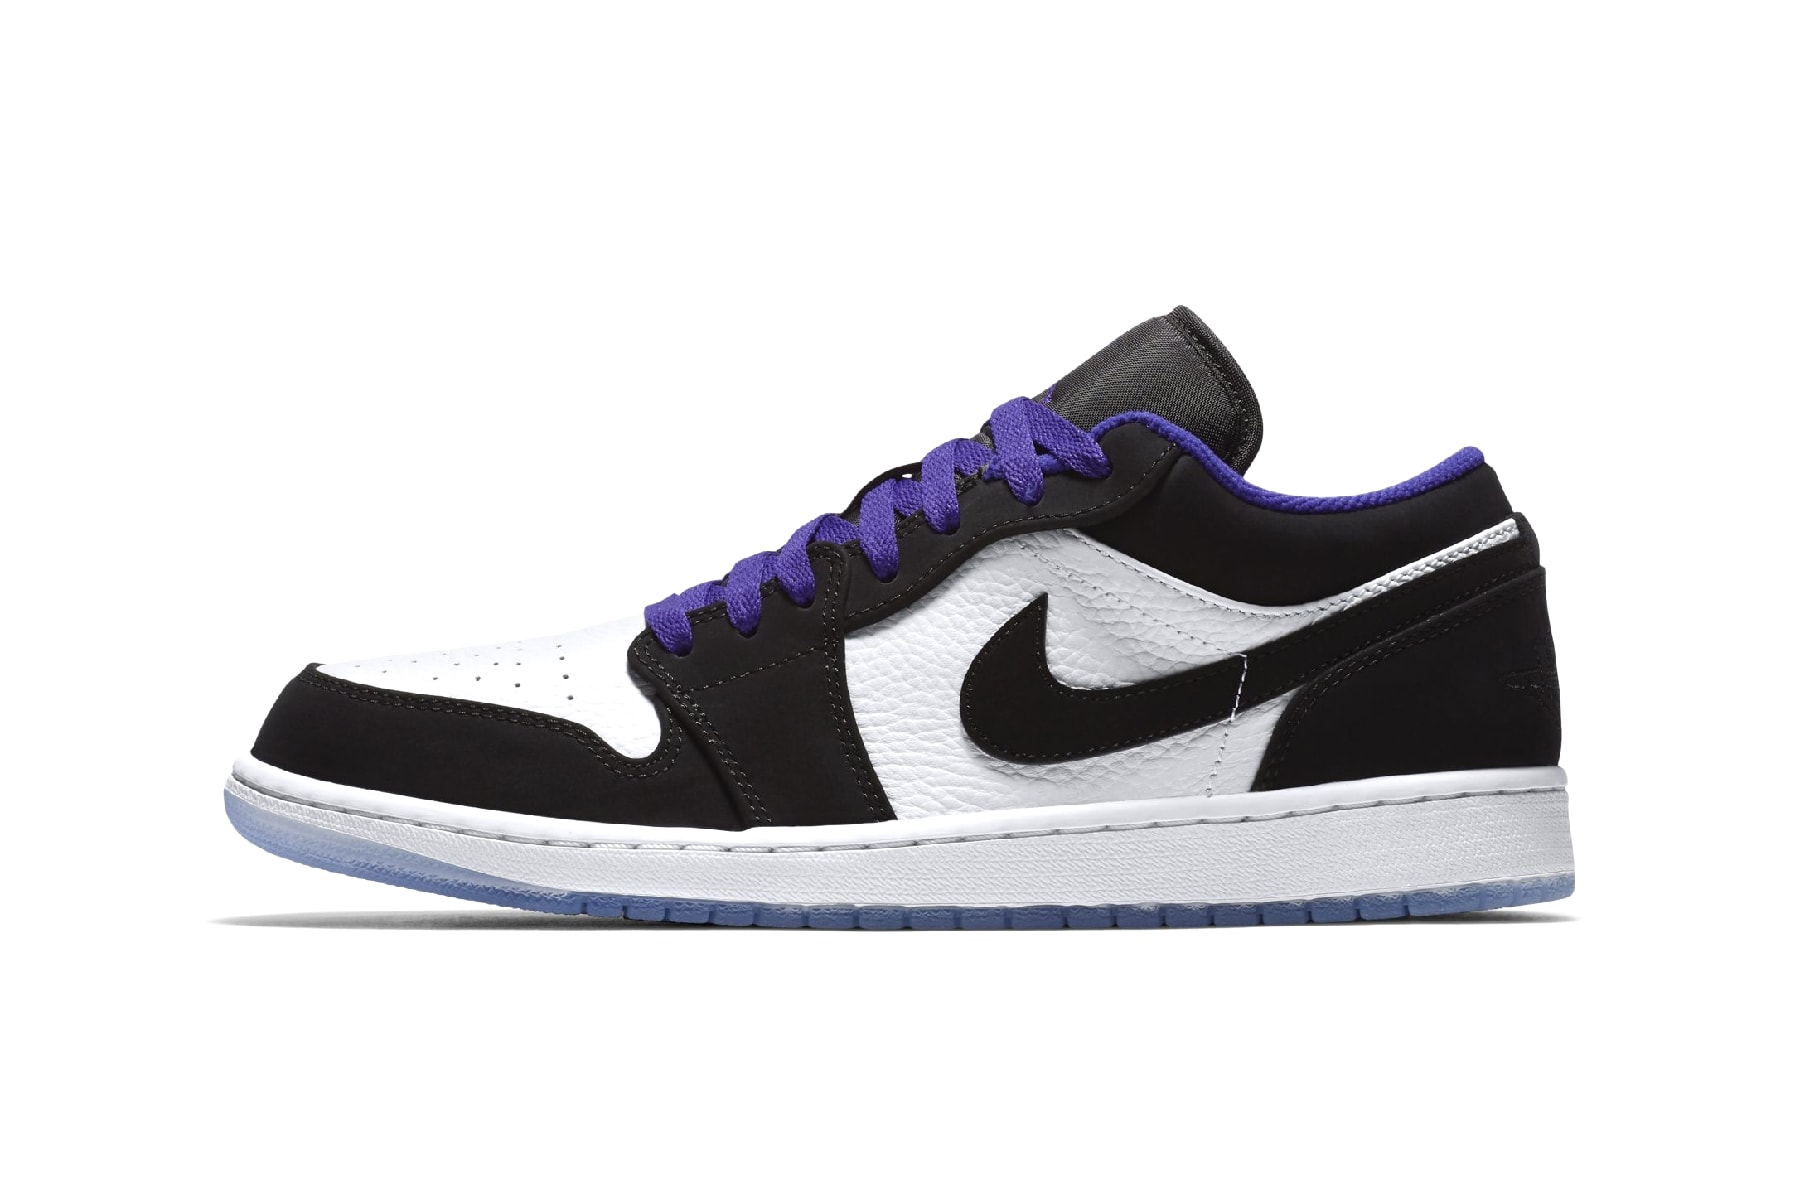 Air Jordan 1 Low New colorways 2018 fall tiffany space jam blue purple sneakers release date price info first look purchase